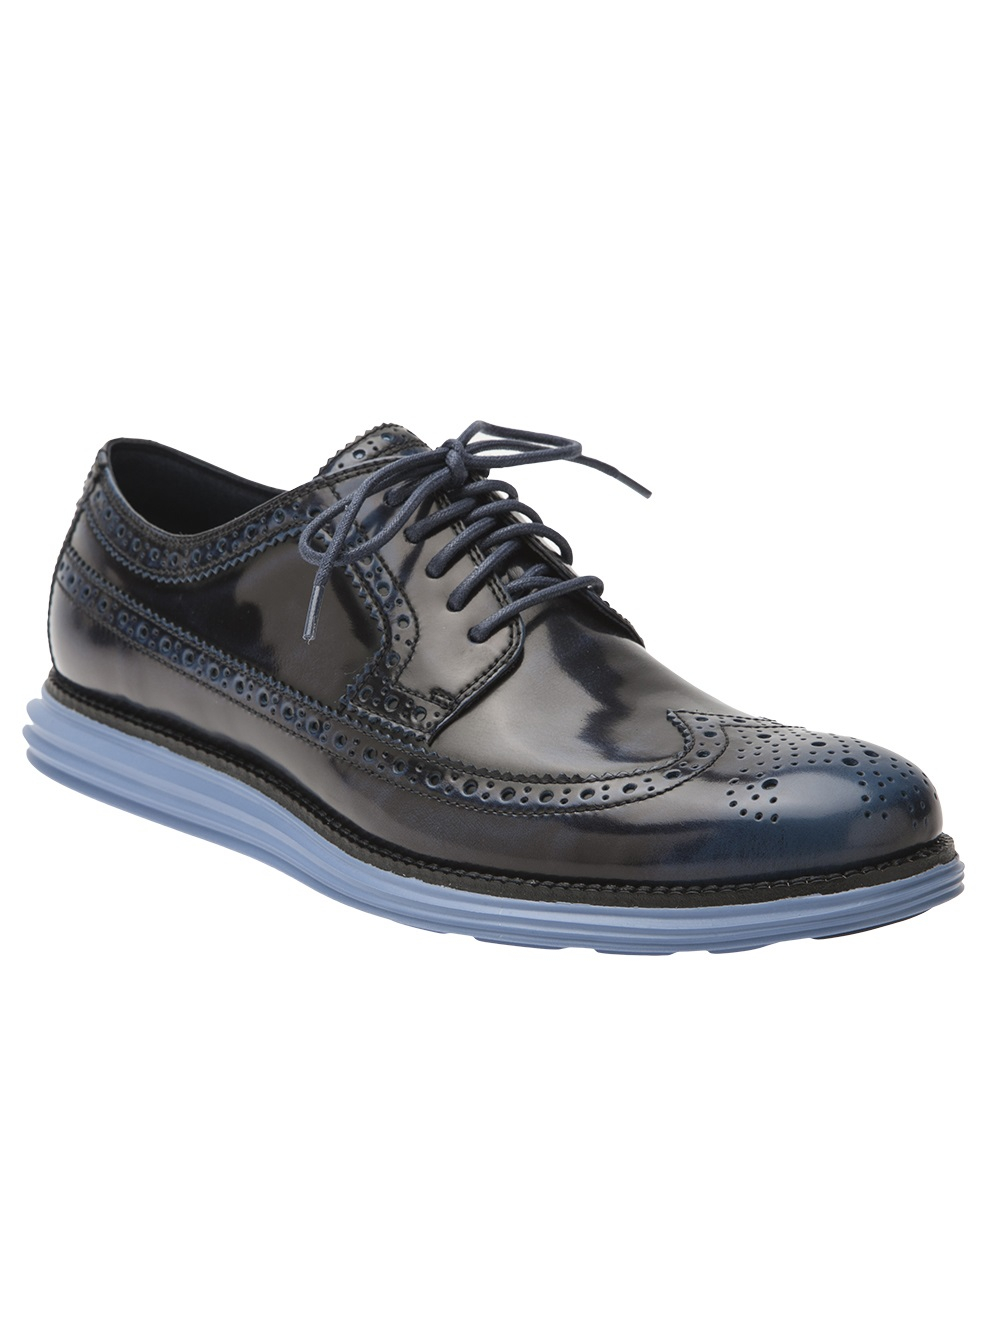 56 Sports Cole haan lunargrand men s shoes for Trend in 2022